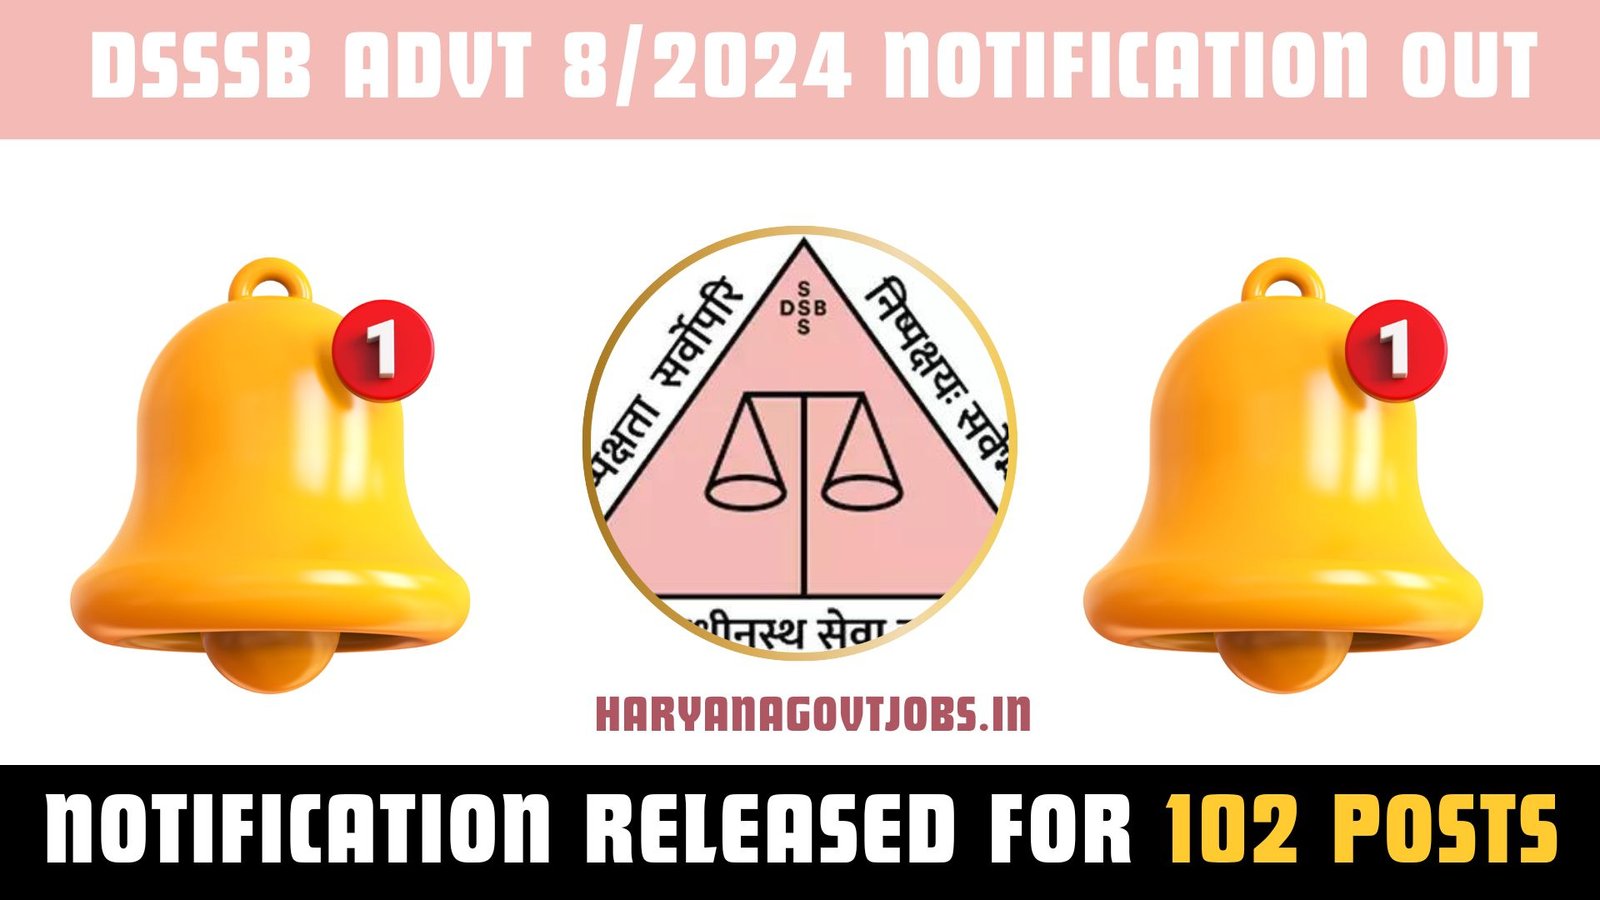 DSSSB Advt 8/2024 Notification Out for Peon, Process Server Posts, Apply Online